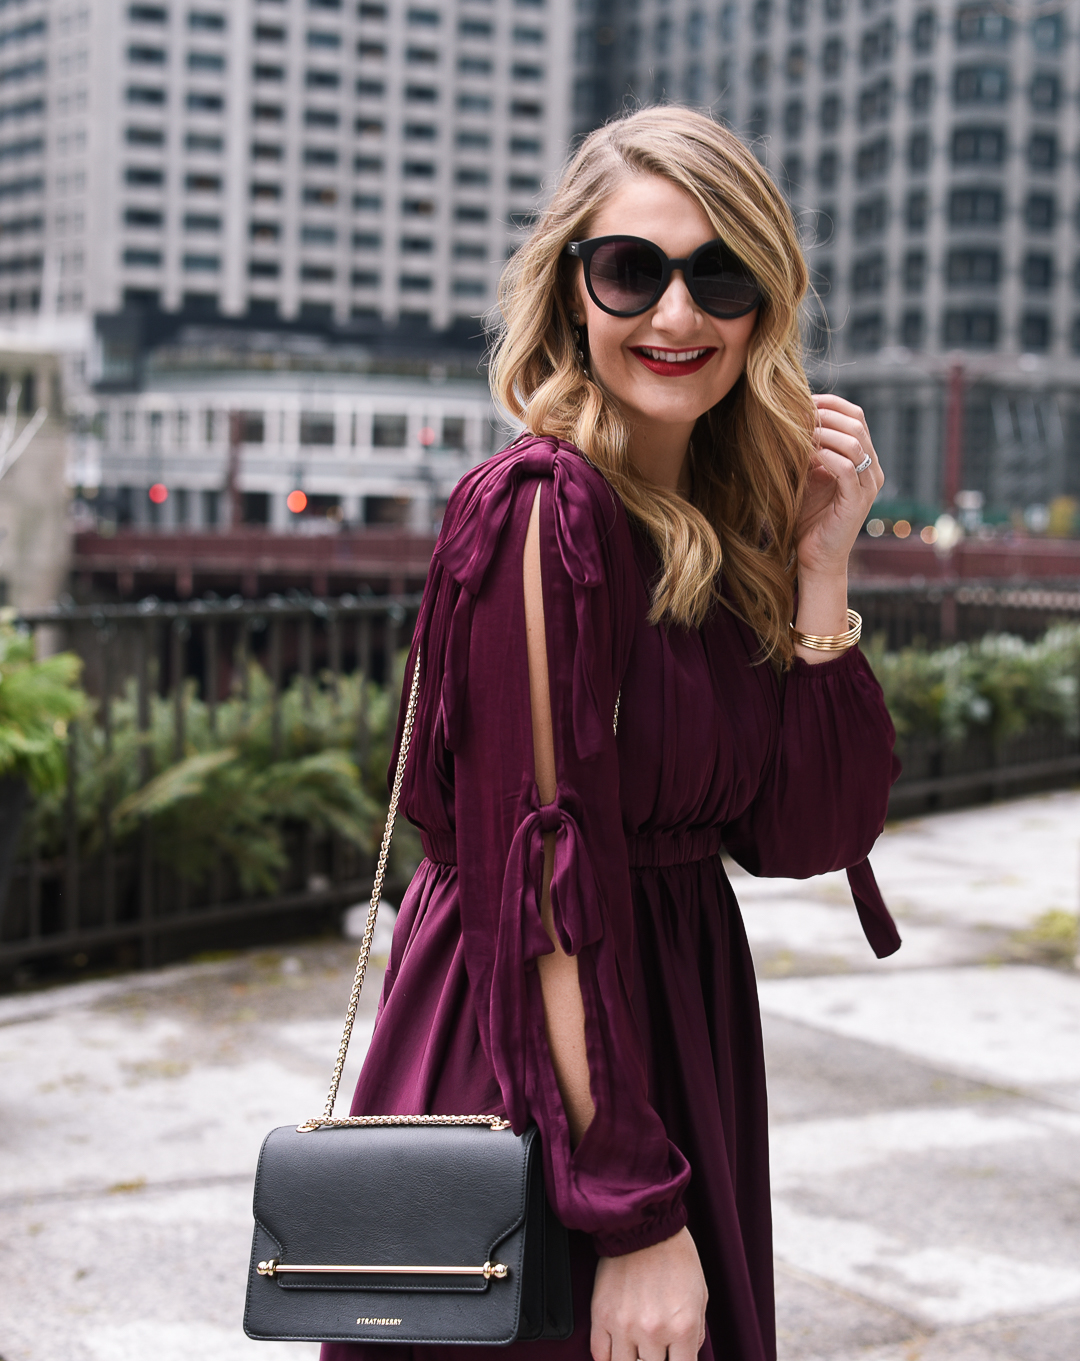 affordable black sunglasses by quay australia - Burgundy Holiday Dress by Chicago fashion blogger Visions of Vogue